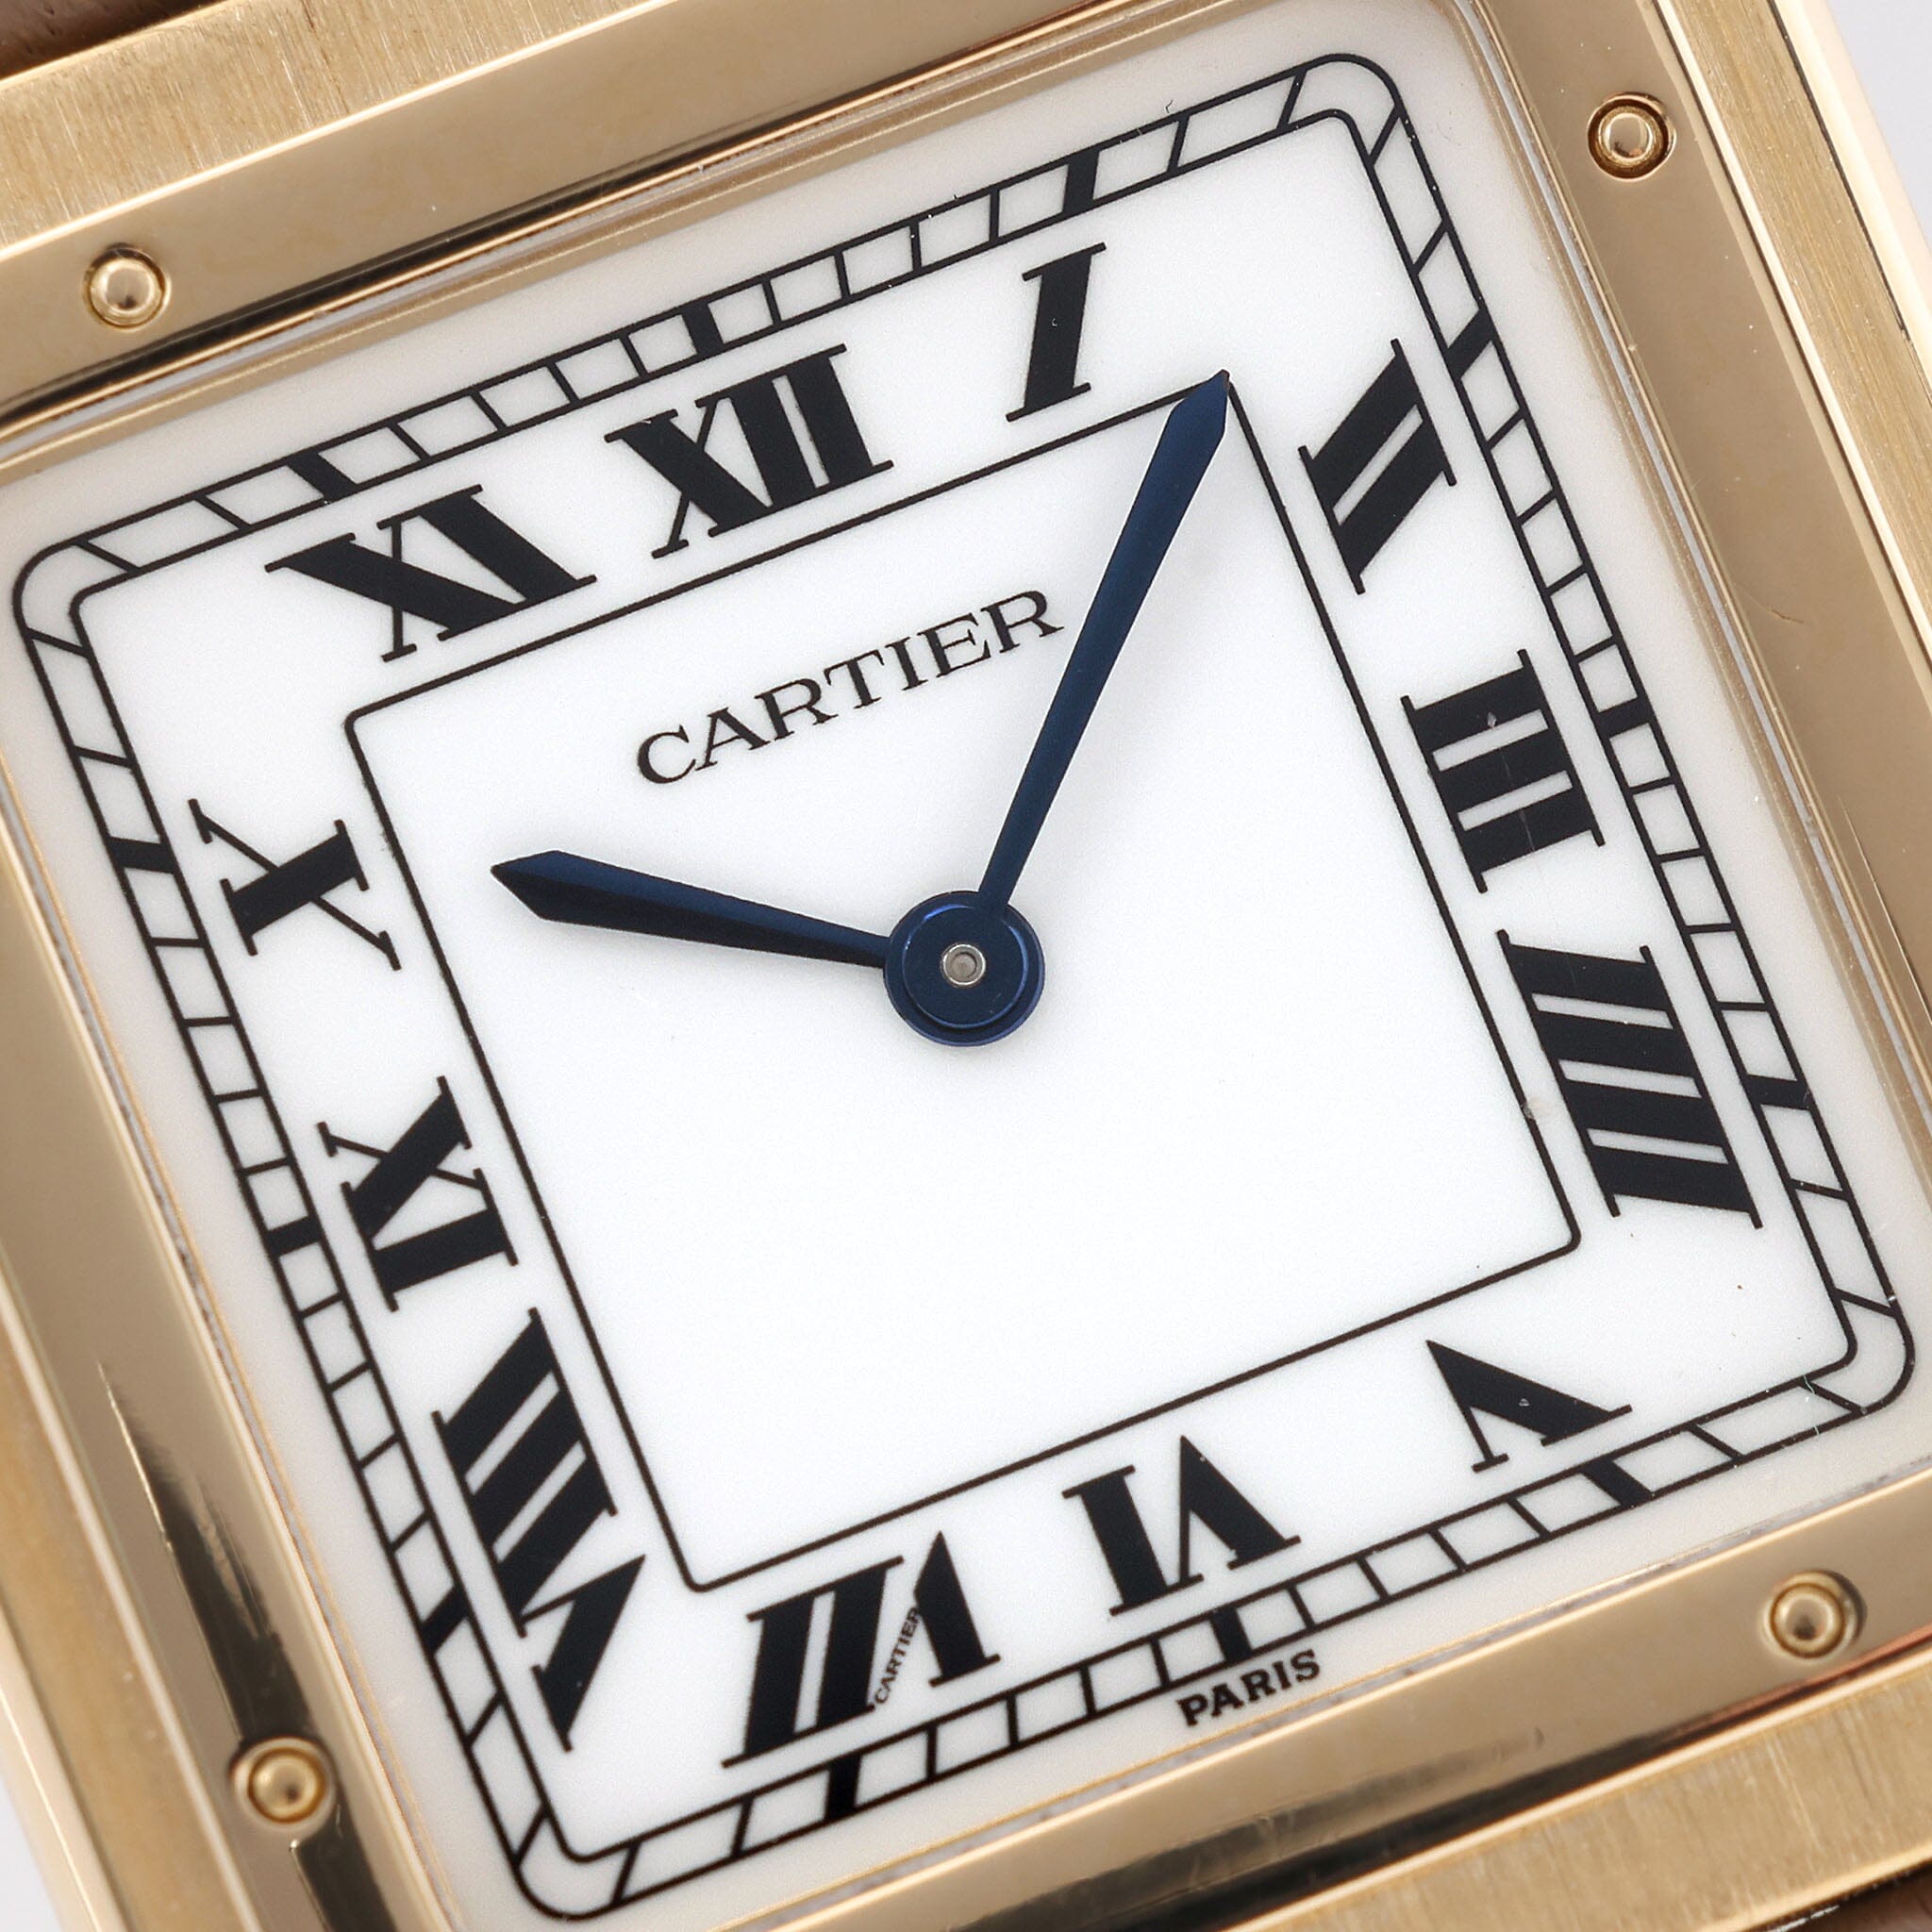 Vintage Cartier 18ct Yellow Gold Tank